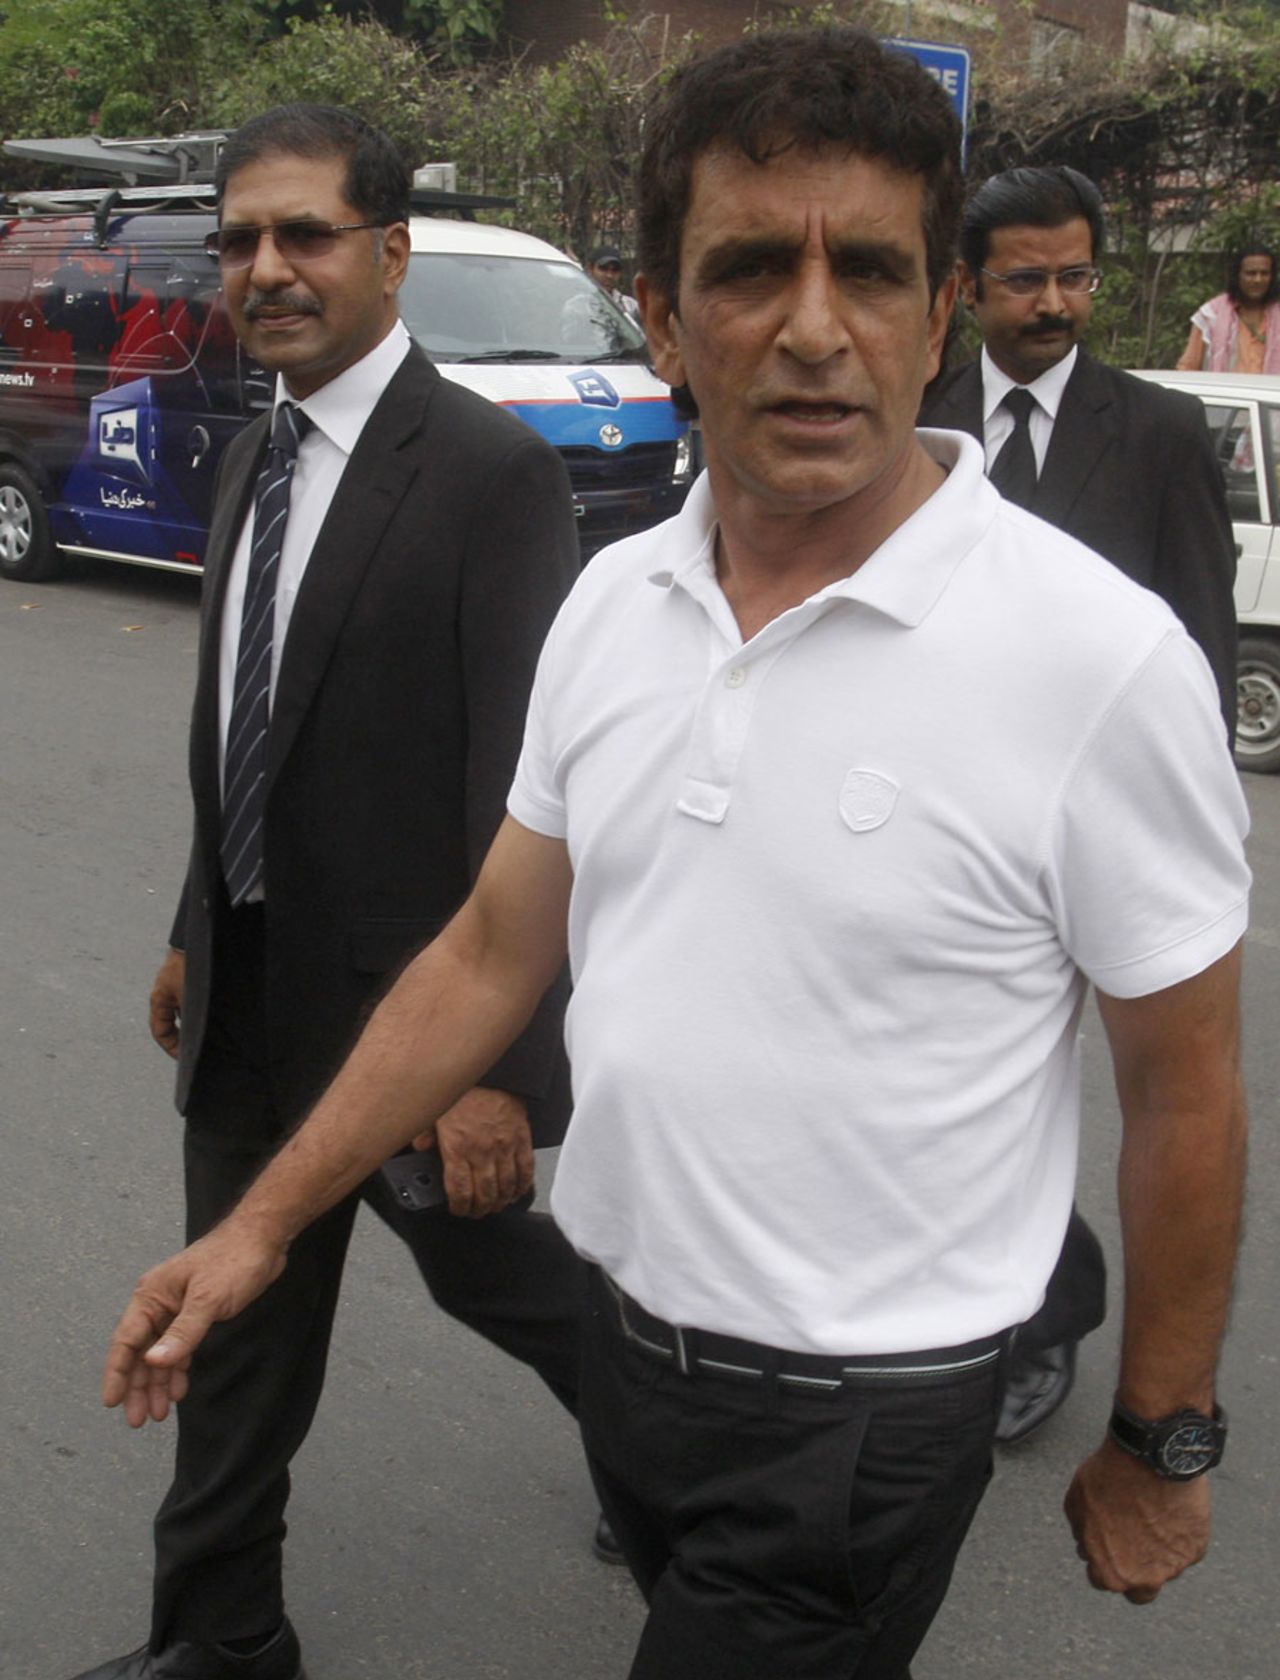 Asad Rauf leaves the press conference with his lawyer Syed Ali Zafar, Lahore, September 27, 2013